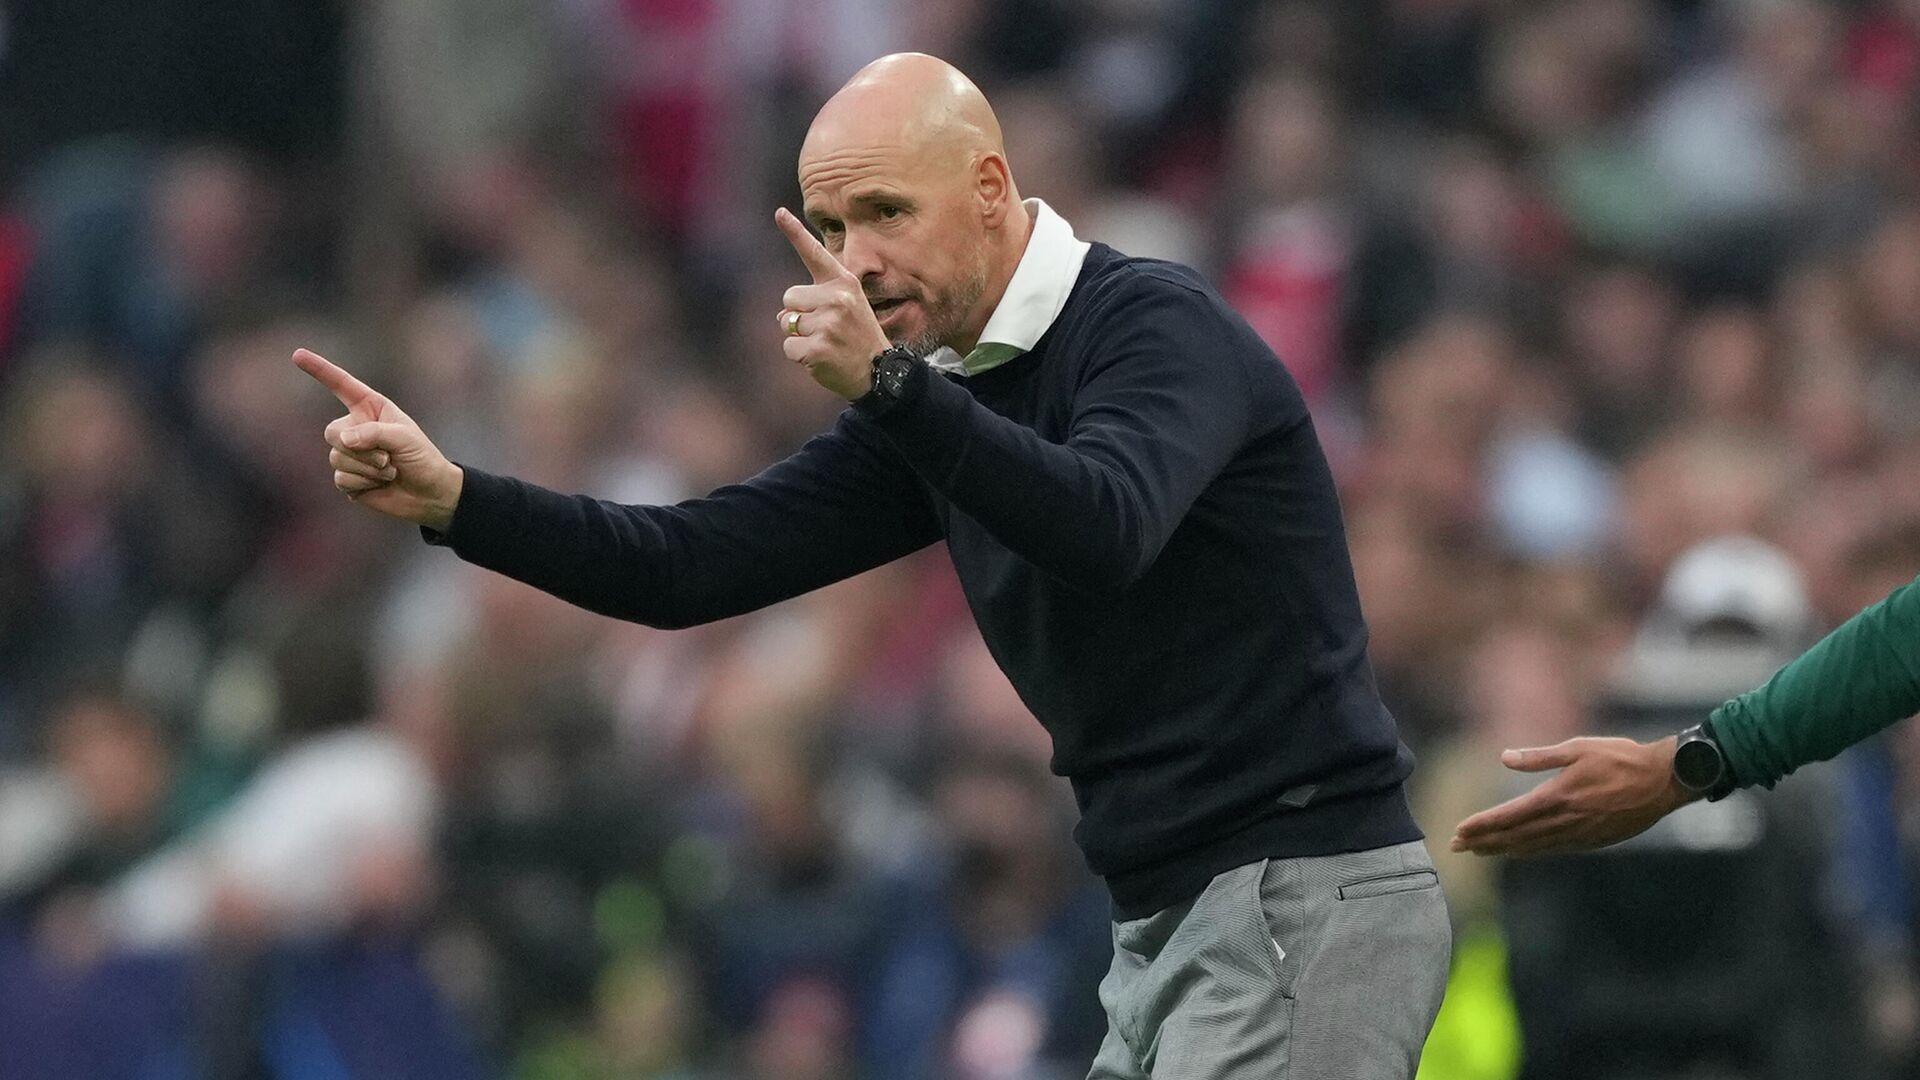 Ajax's head coach Erik ten Hag gives instructions from the side line during the Champions League group C soccer match between Ajax and Besiktas at the Johan Cruyff ArenA in Amsterdam in Amsterdam, Netherlands, Tuesday, Sept. 28, 2021 - Sputnik International, 1920, 10.06.2022